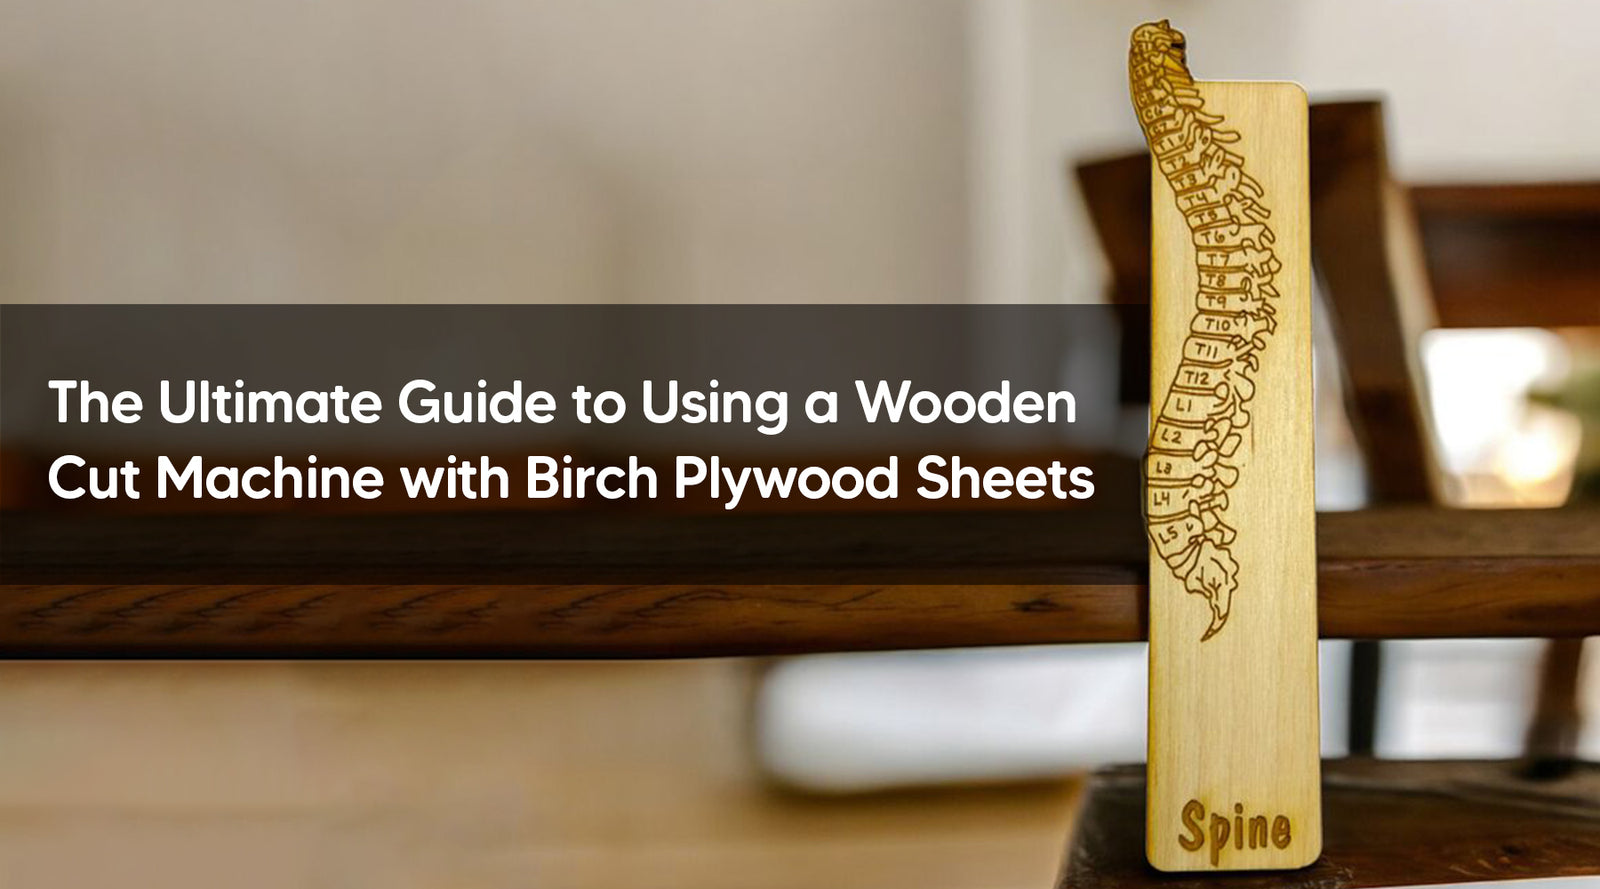 The Ultimate Guide to Using a Wooden Cut Machine with Birch Plywood Sheets